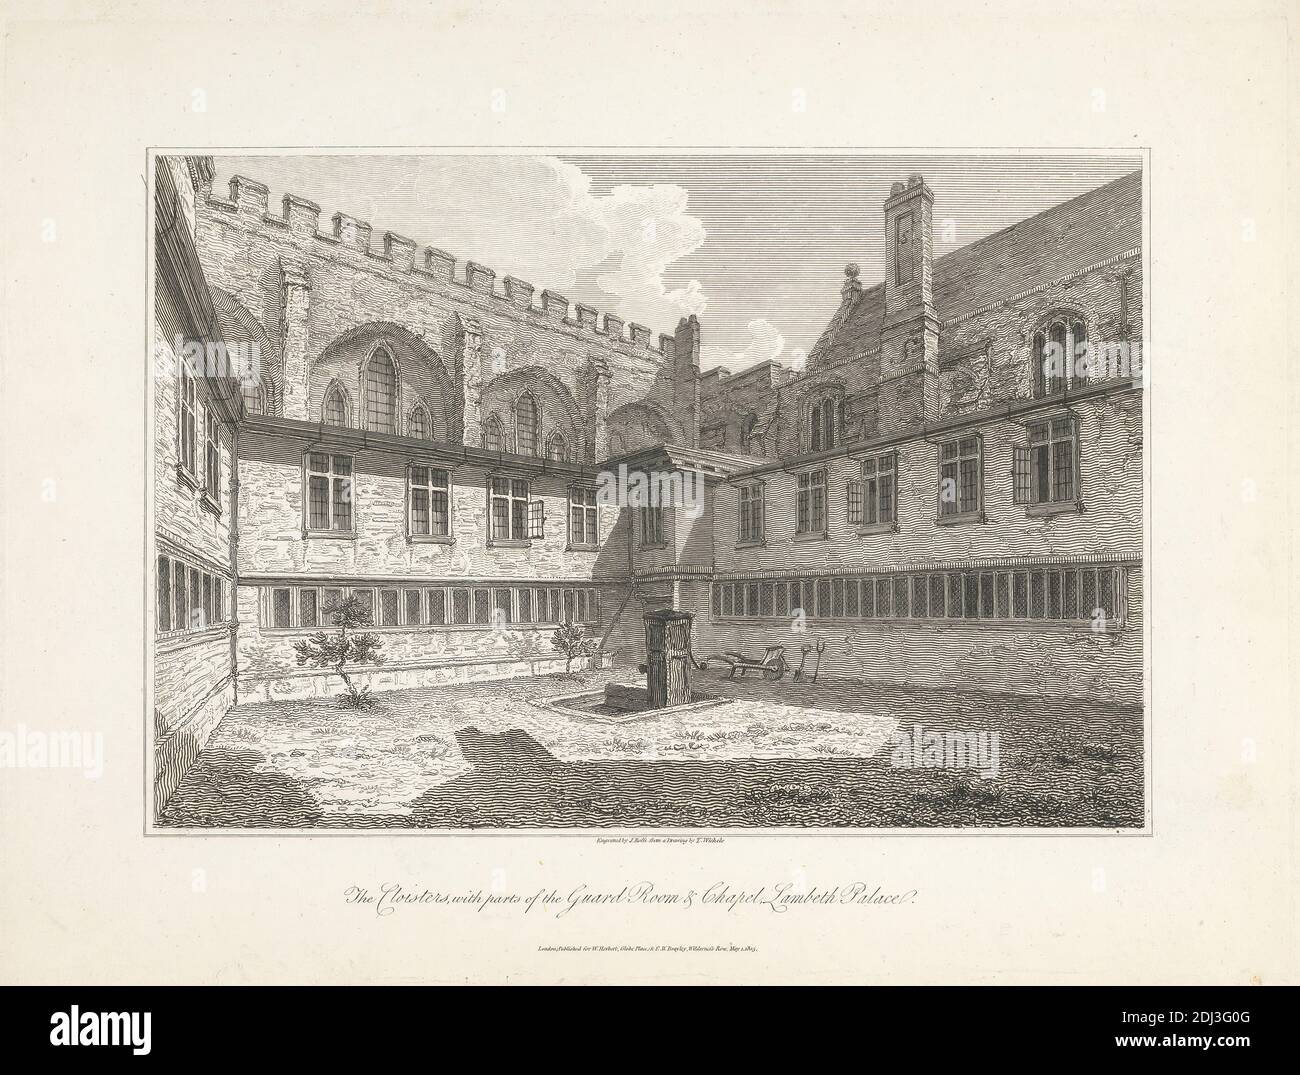 The Cloisters, with Parts of the Guard Room & Chapel, Lambeth Palace, after C. John M. Whichelo, 1784–1865, British, John Roffe, 1769–1850, British, 1805, Engraving Stockfoto